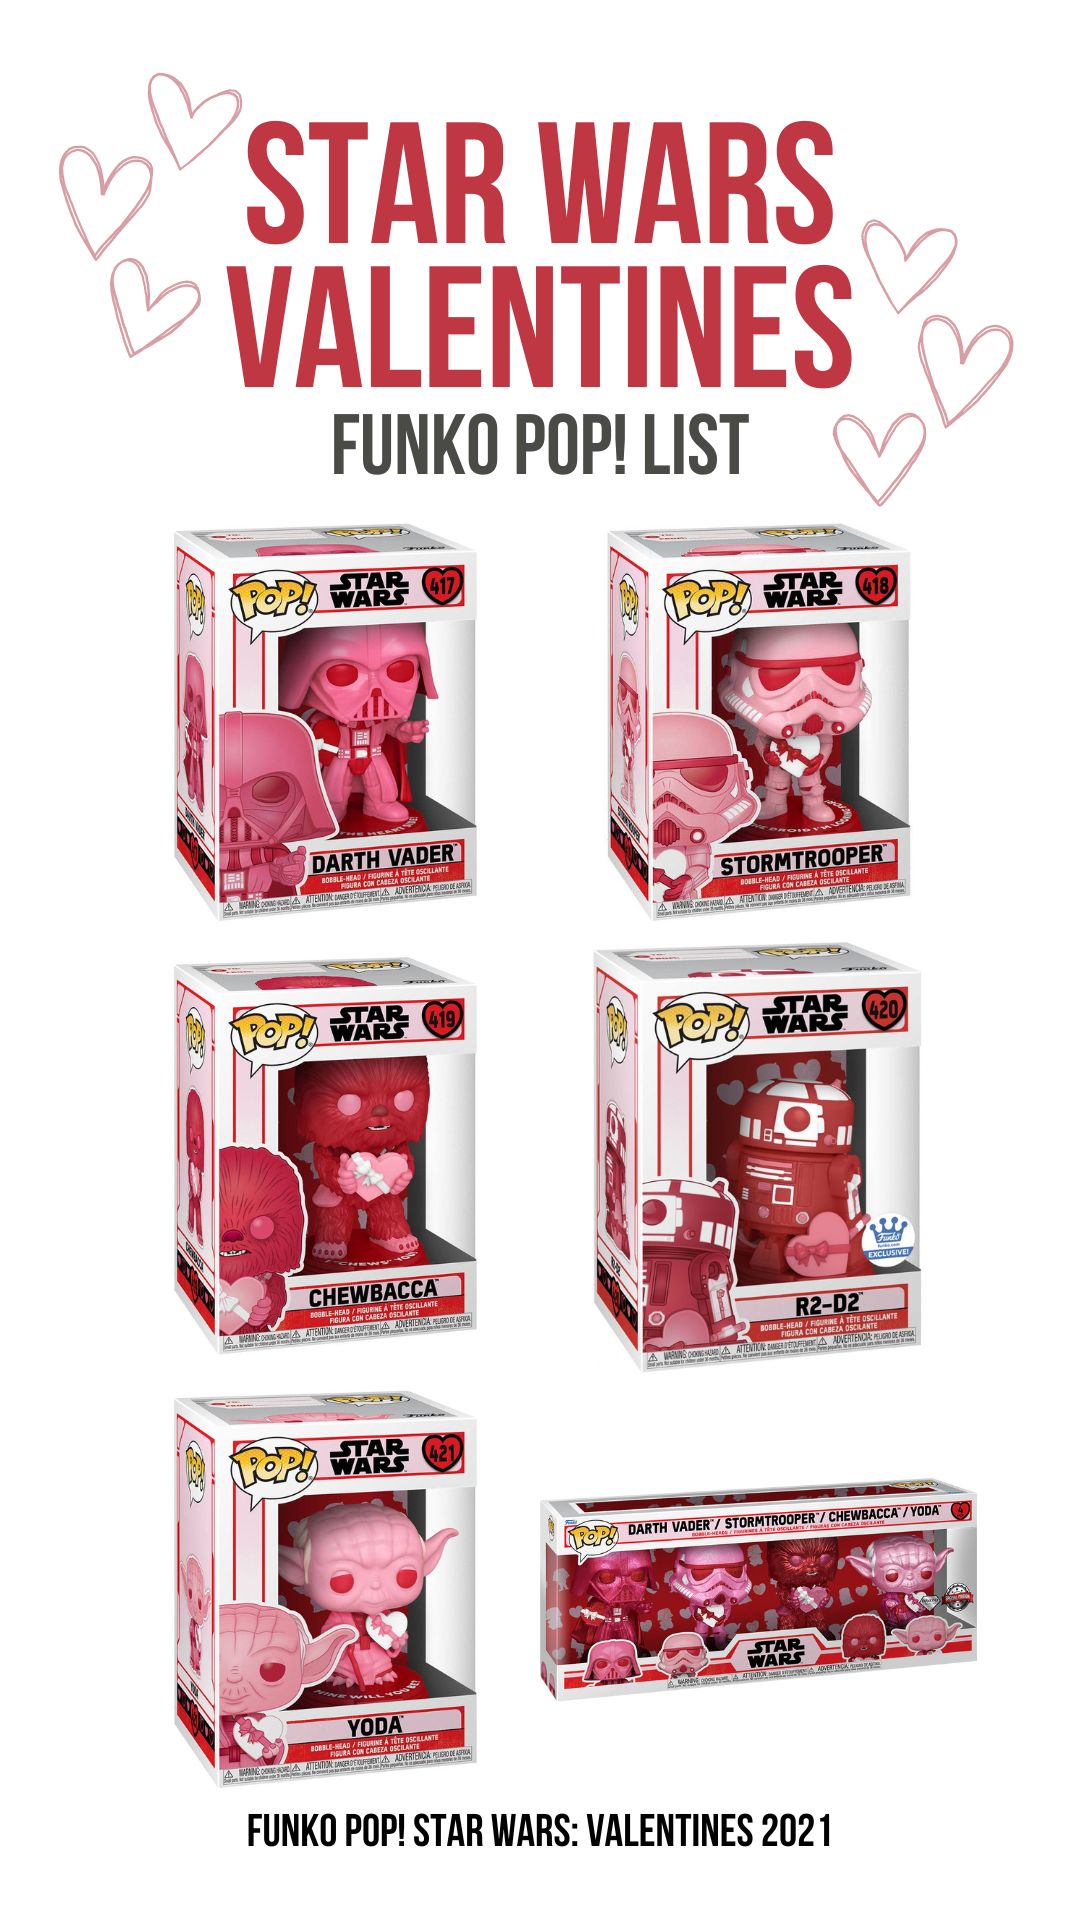 Star Wars Funko Pop Valentines List of Figures with Boxes 2021